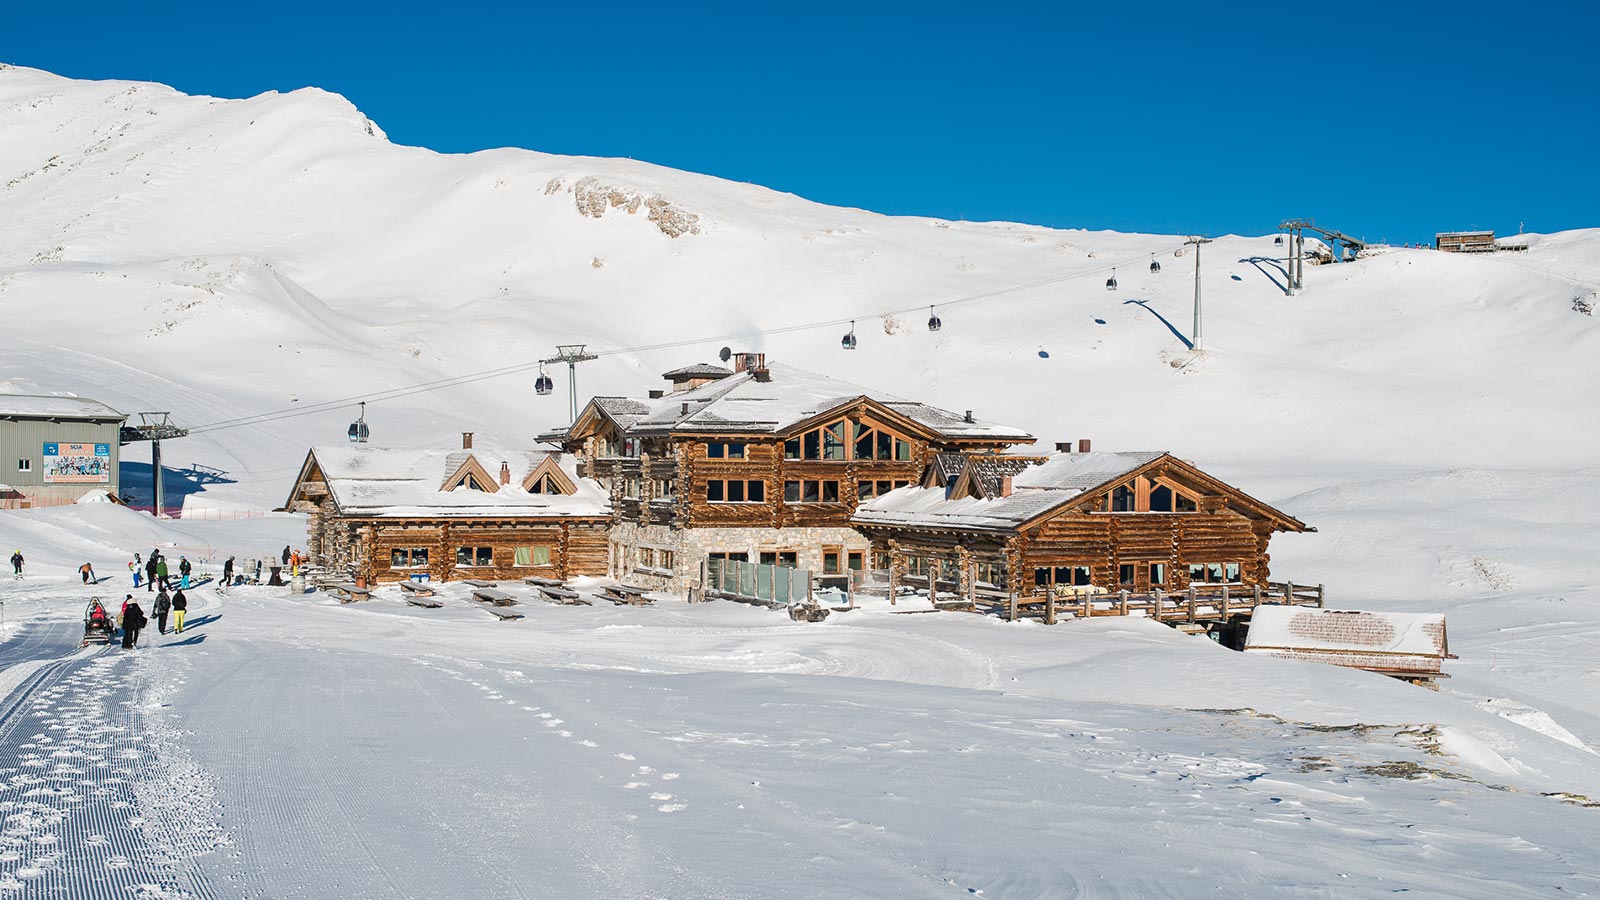 Outside of the moutain lodge during the winter at Santa Caterina Valfurva in the heart of the Stelvio National Park